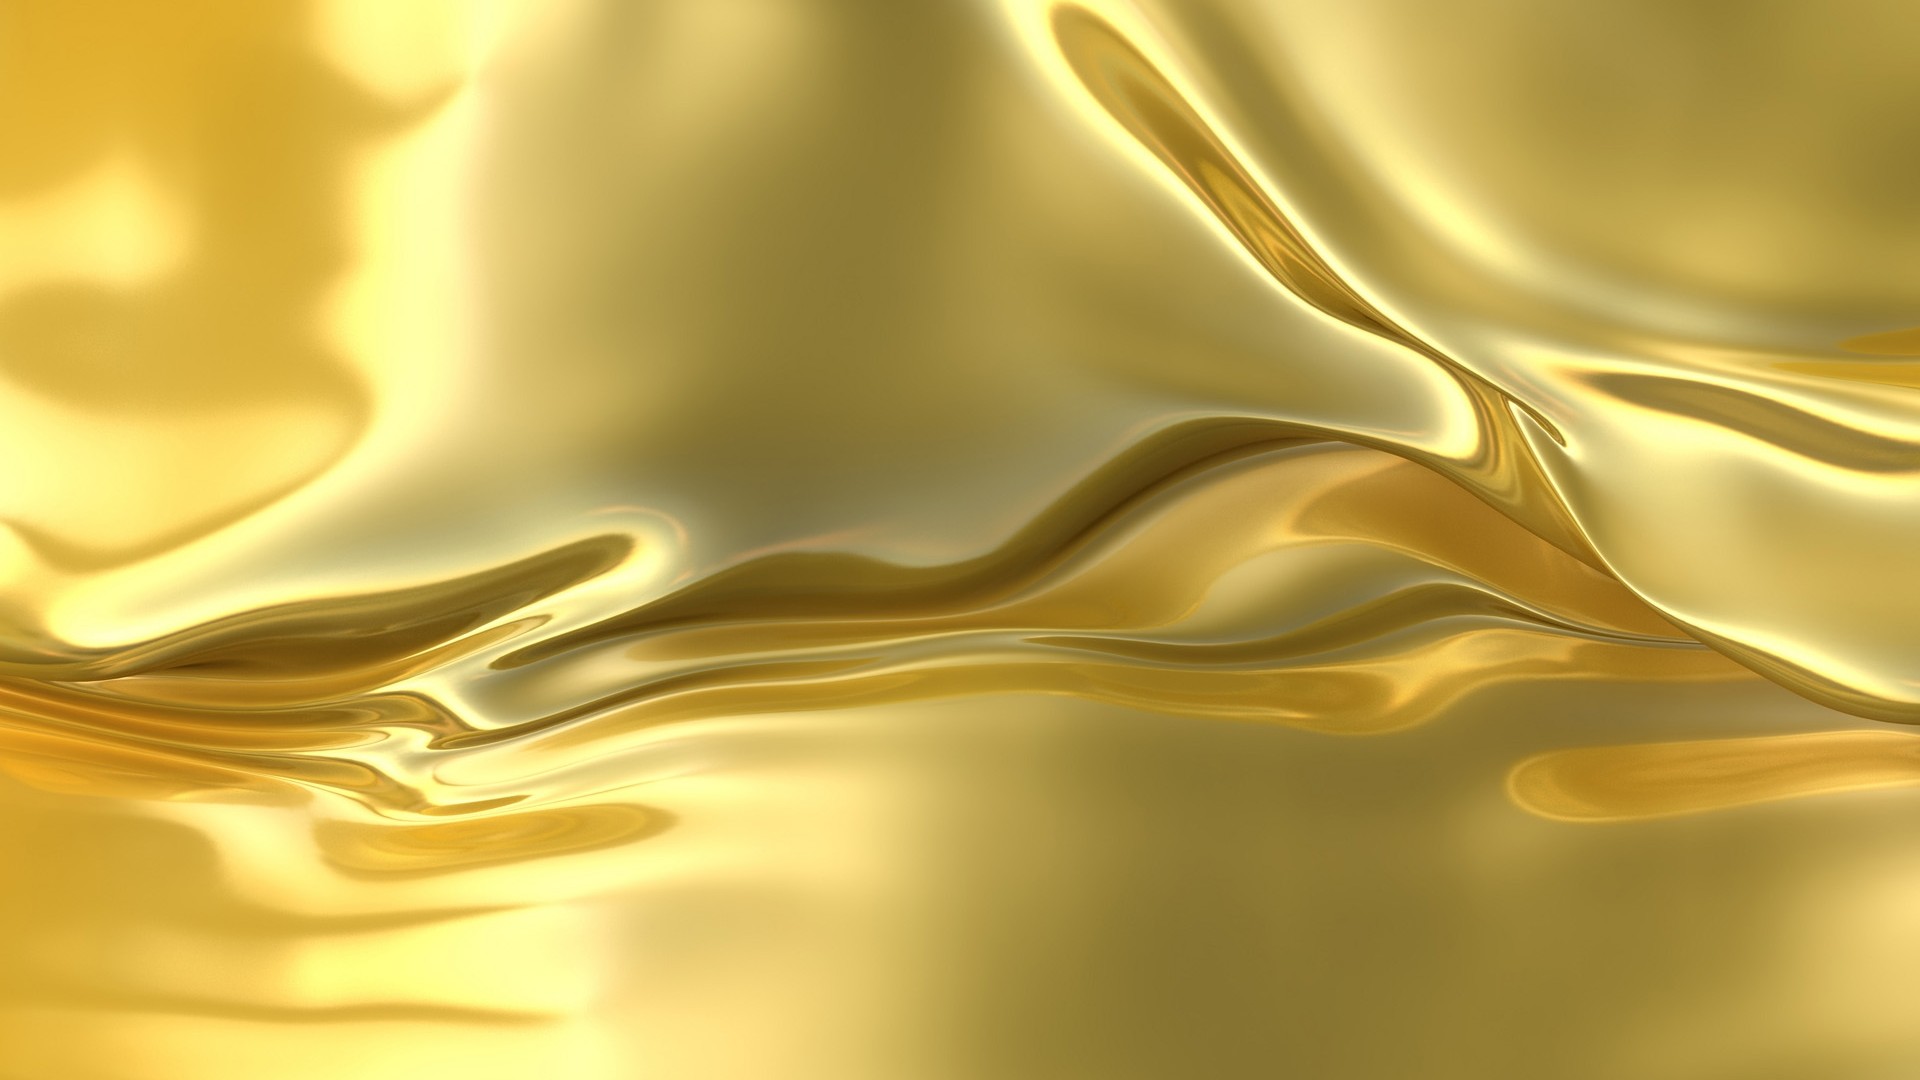 Gold HD Backgrounds With Resolution 1920X1080